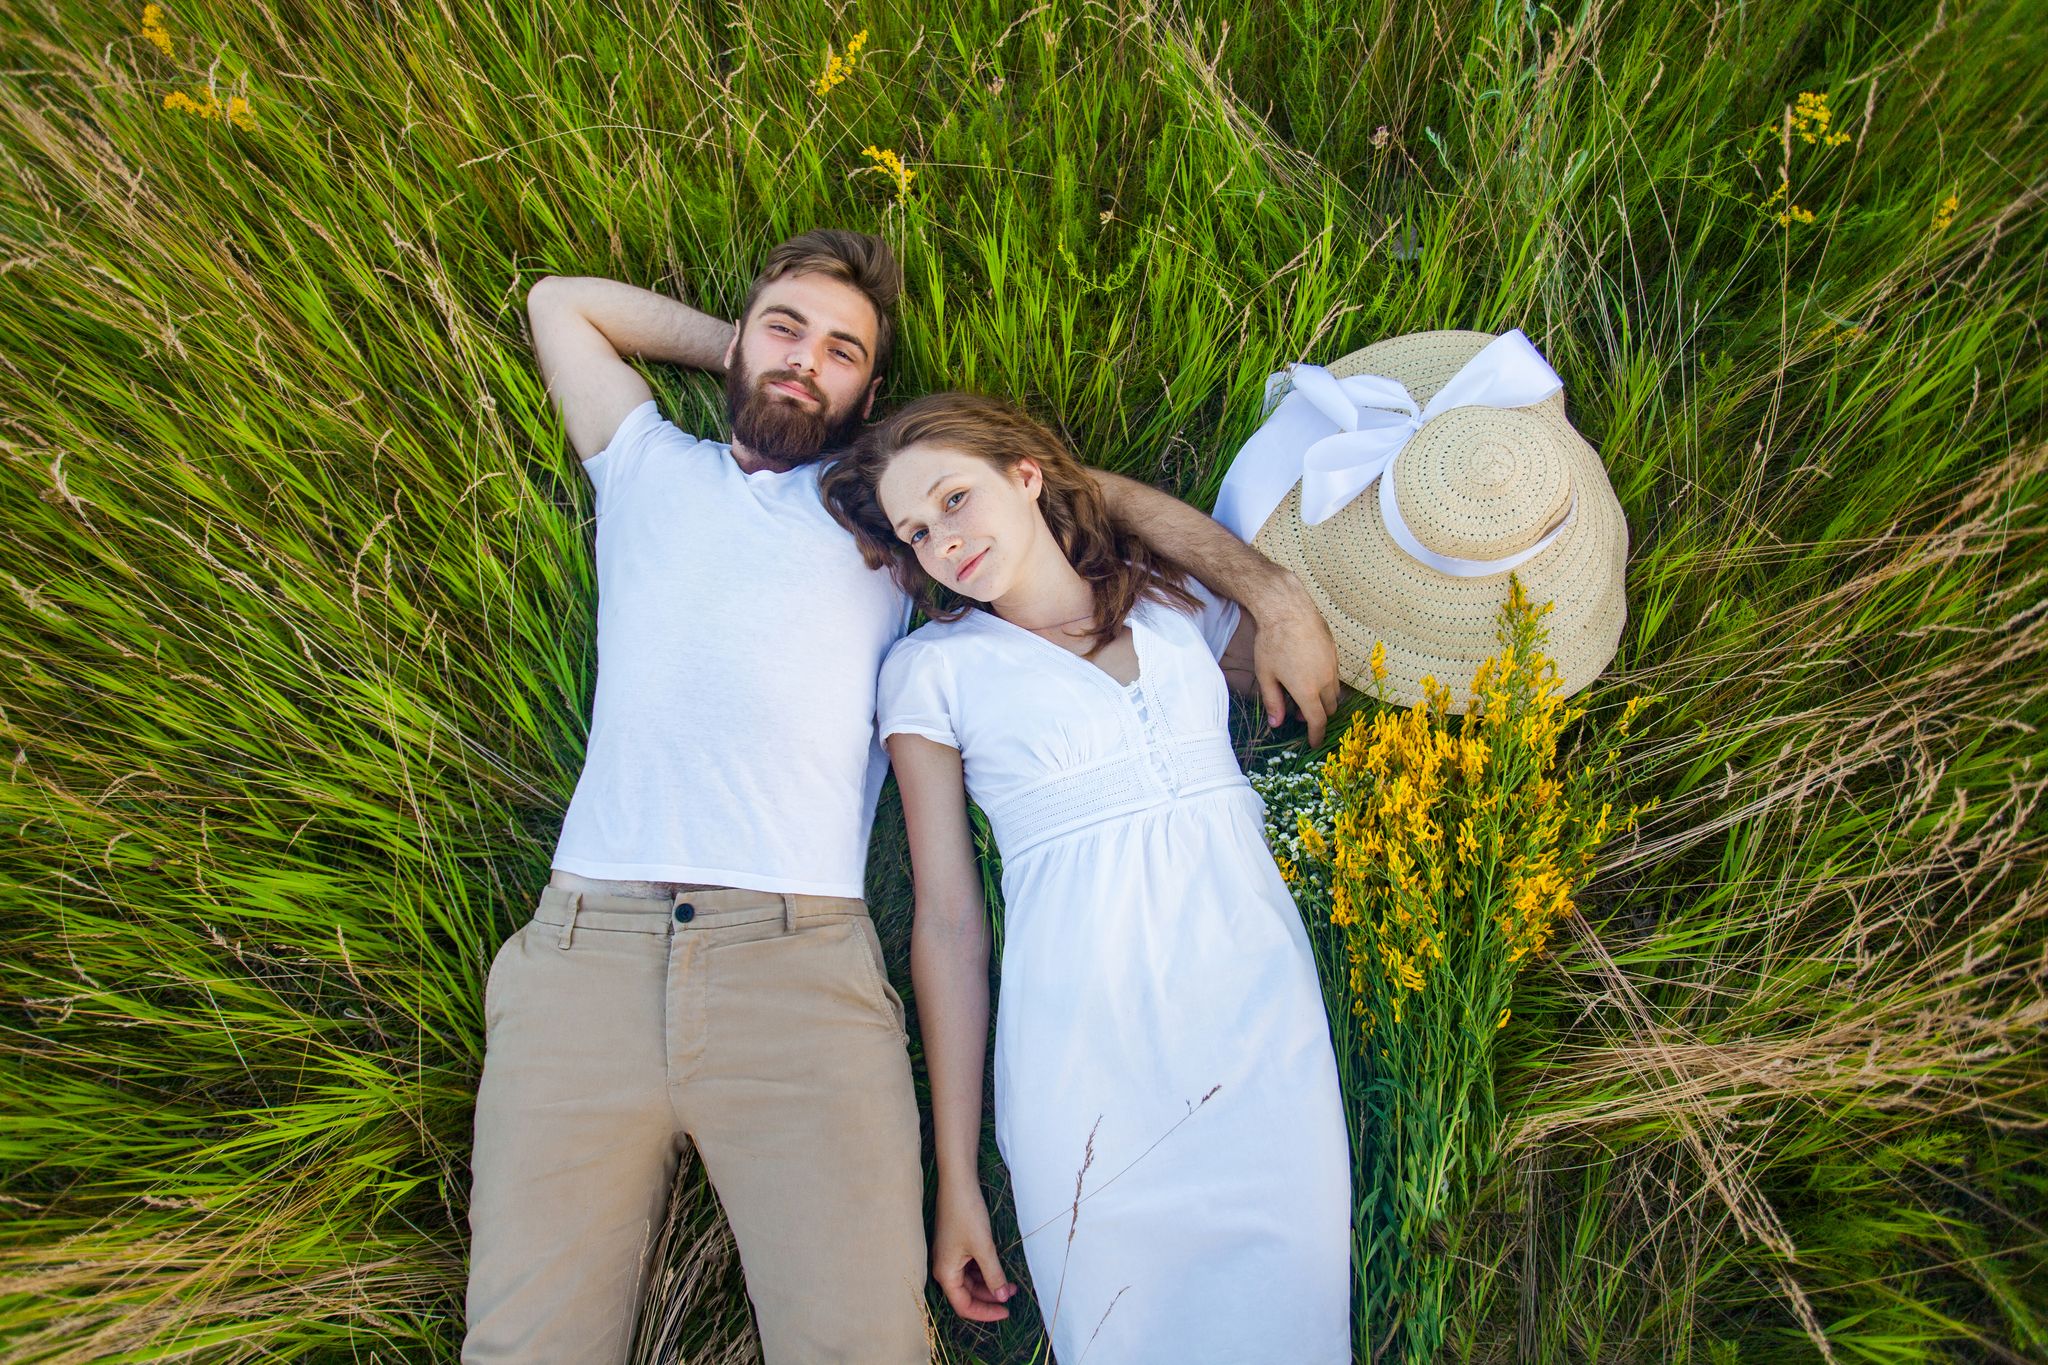 A man and woman on the grass. | Source: Shutterstock